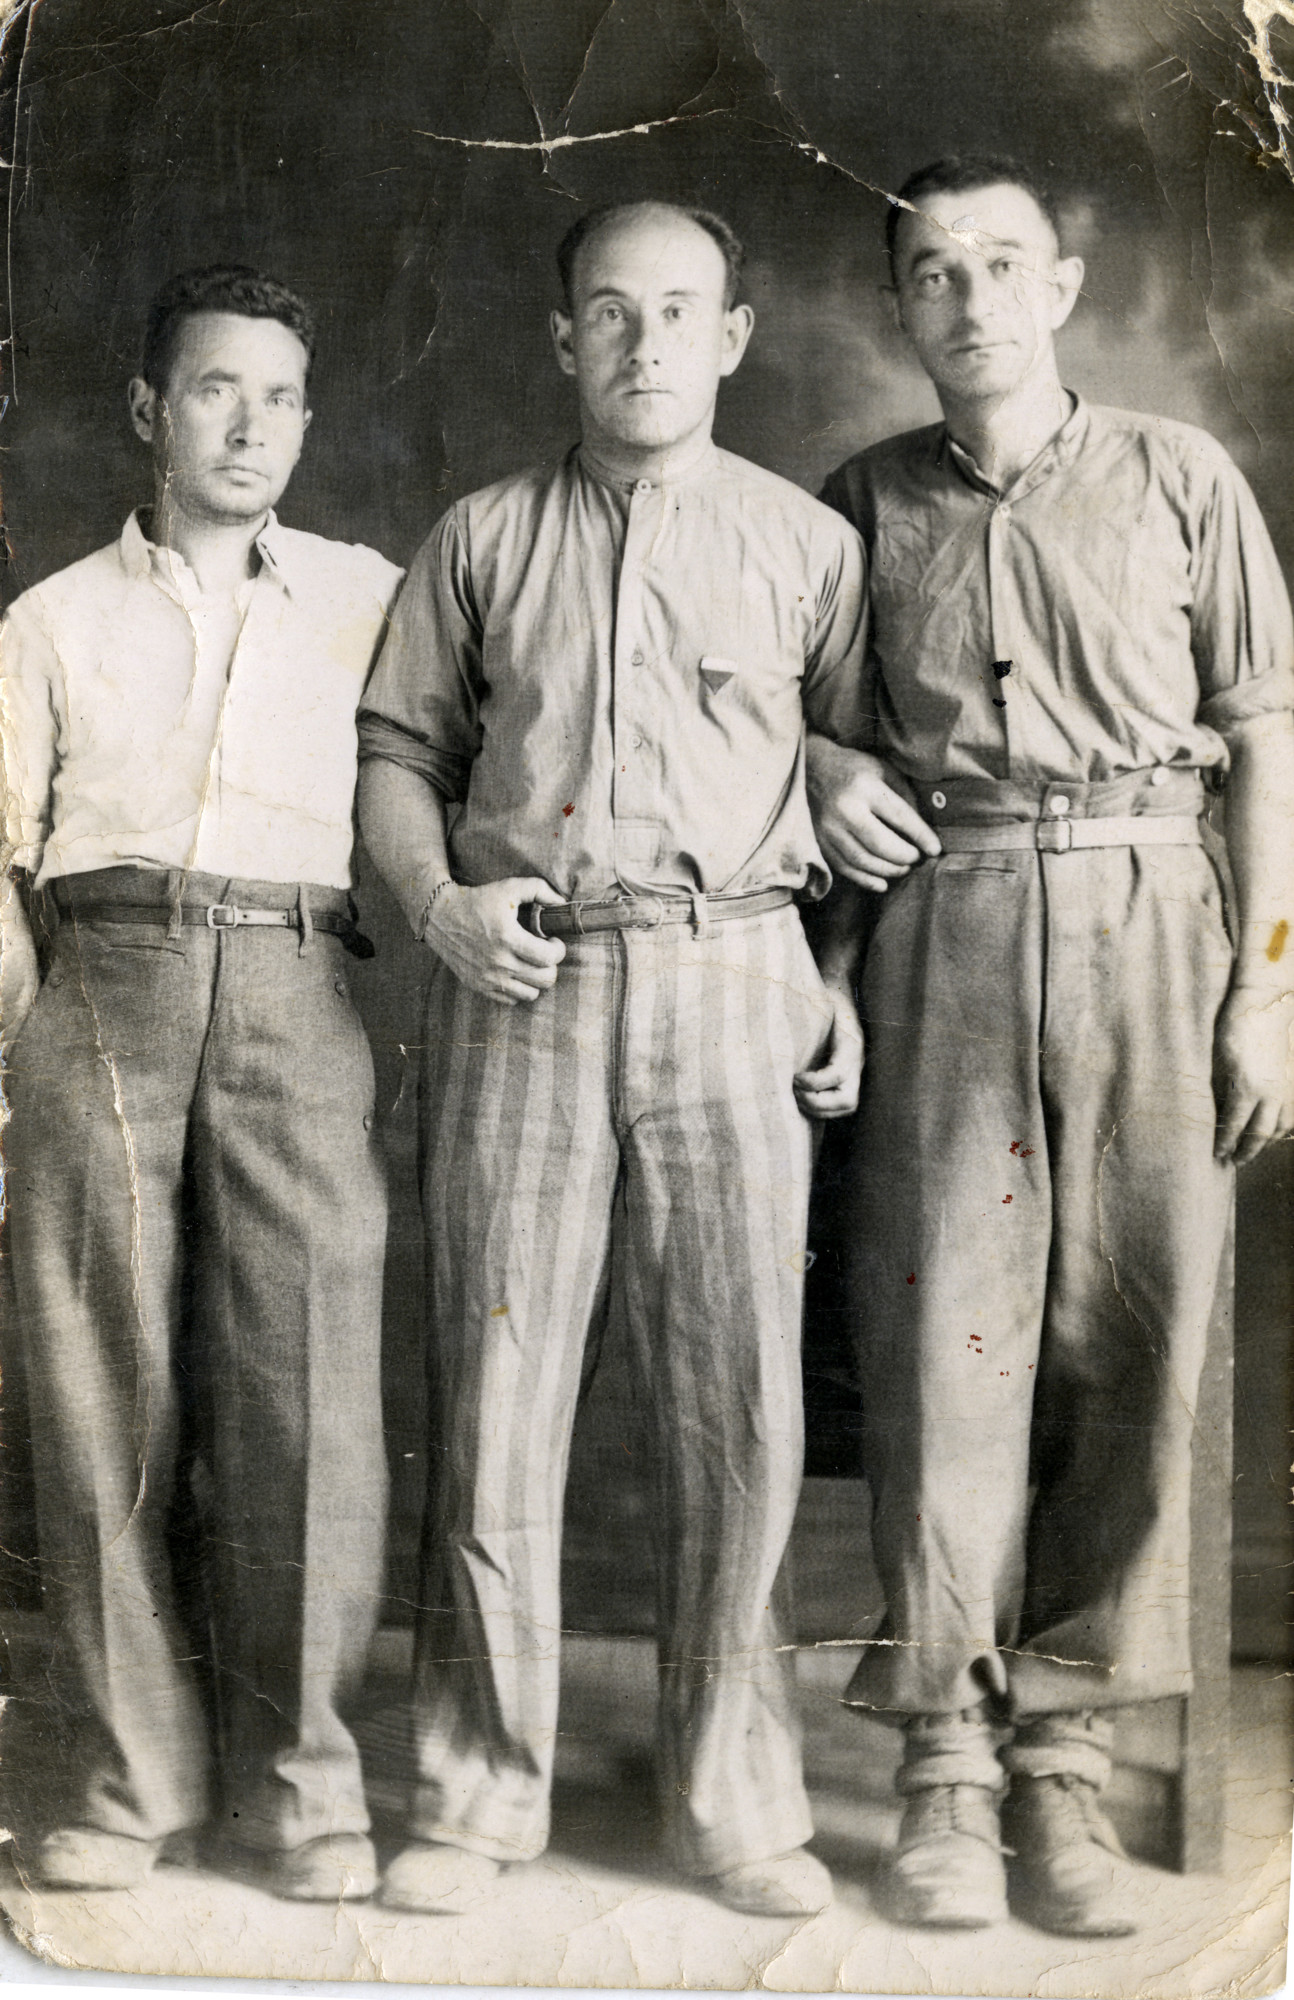 Portrait of three survivors shortly after their  liberation from the Dachau concentration camp.

Among those pictured is Yaakov Michles (right).